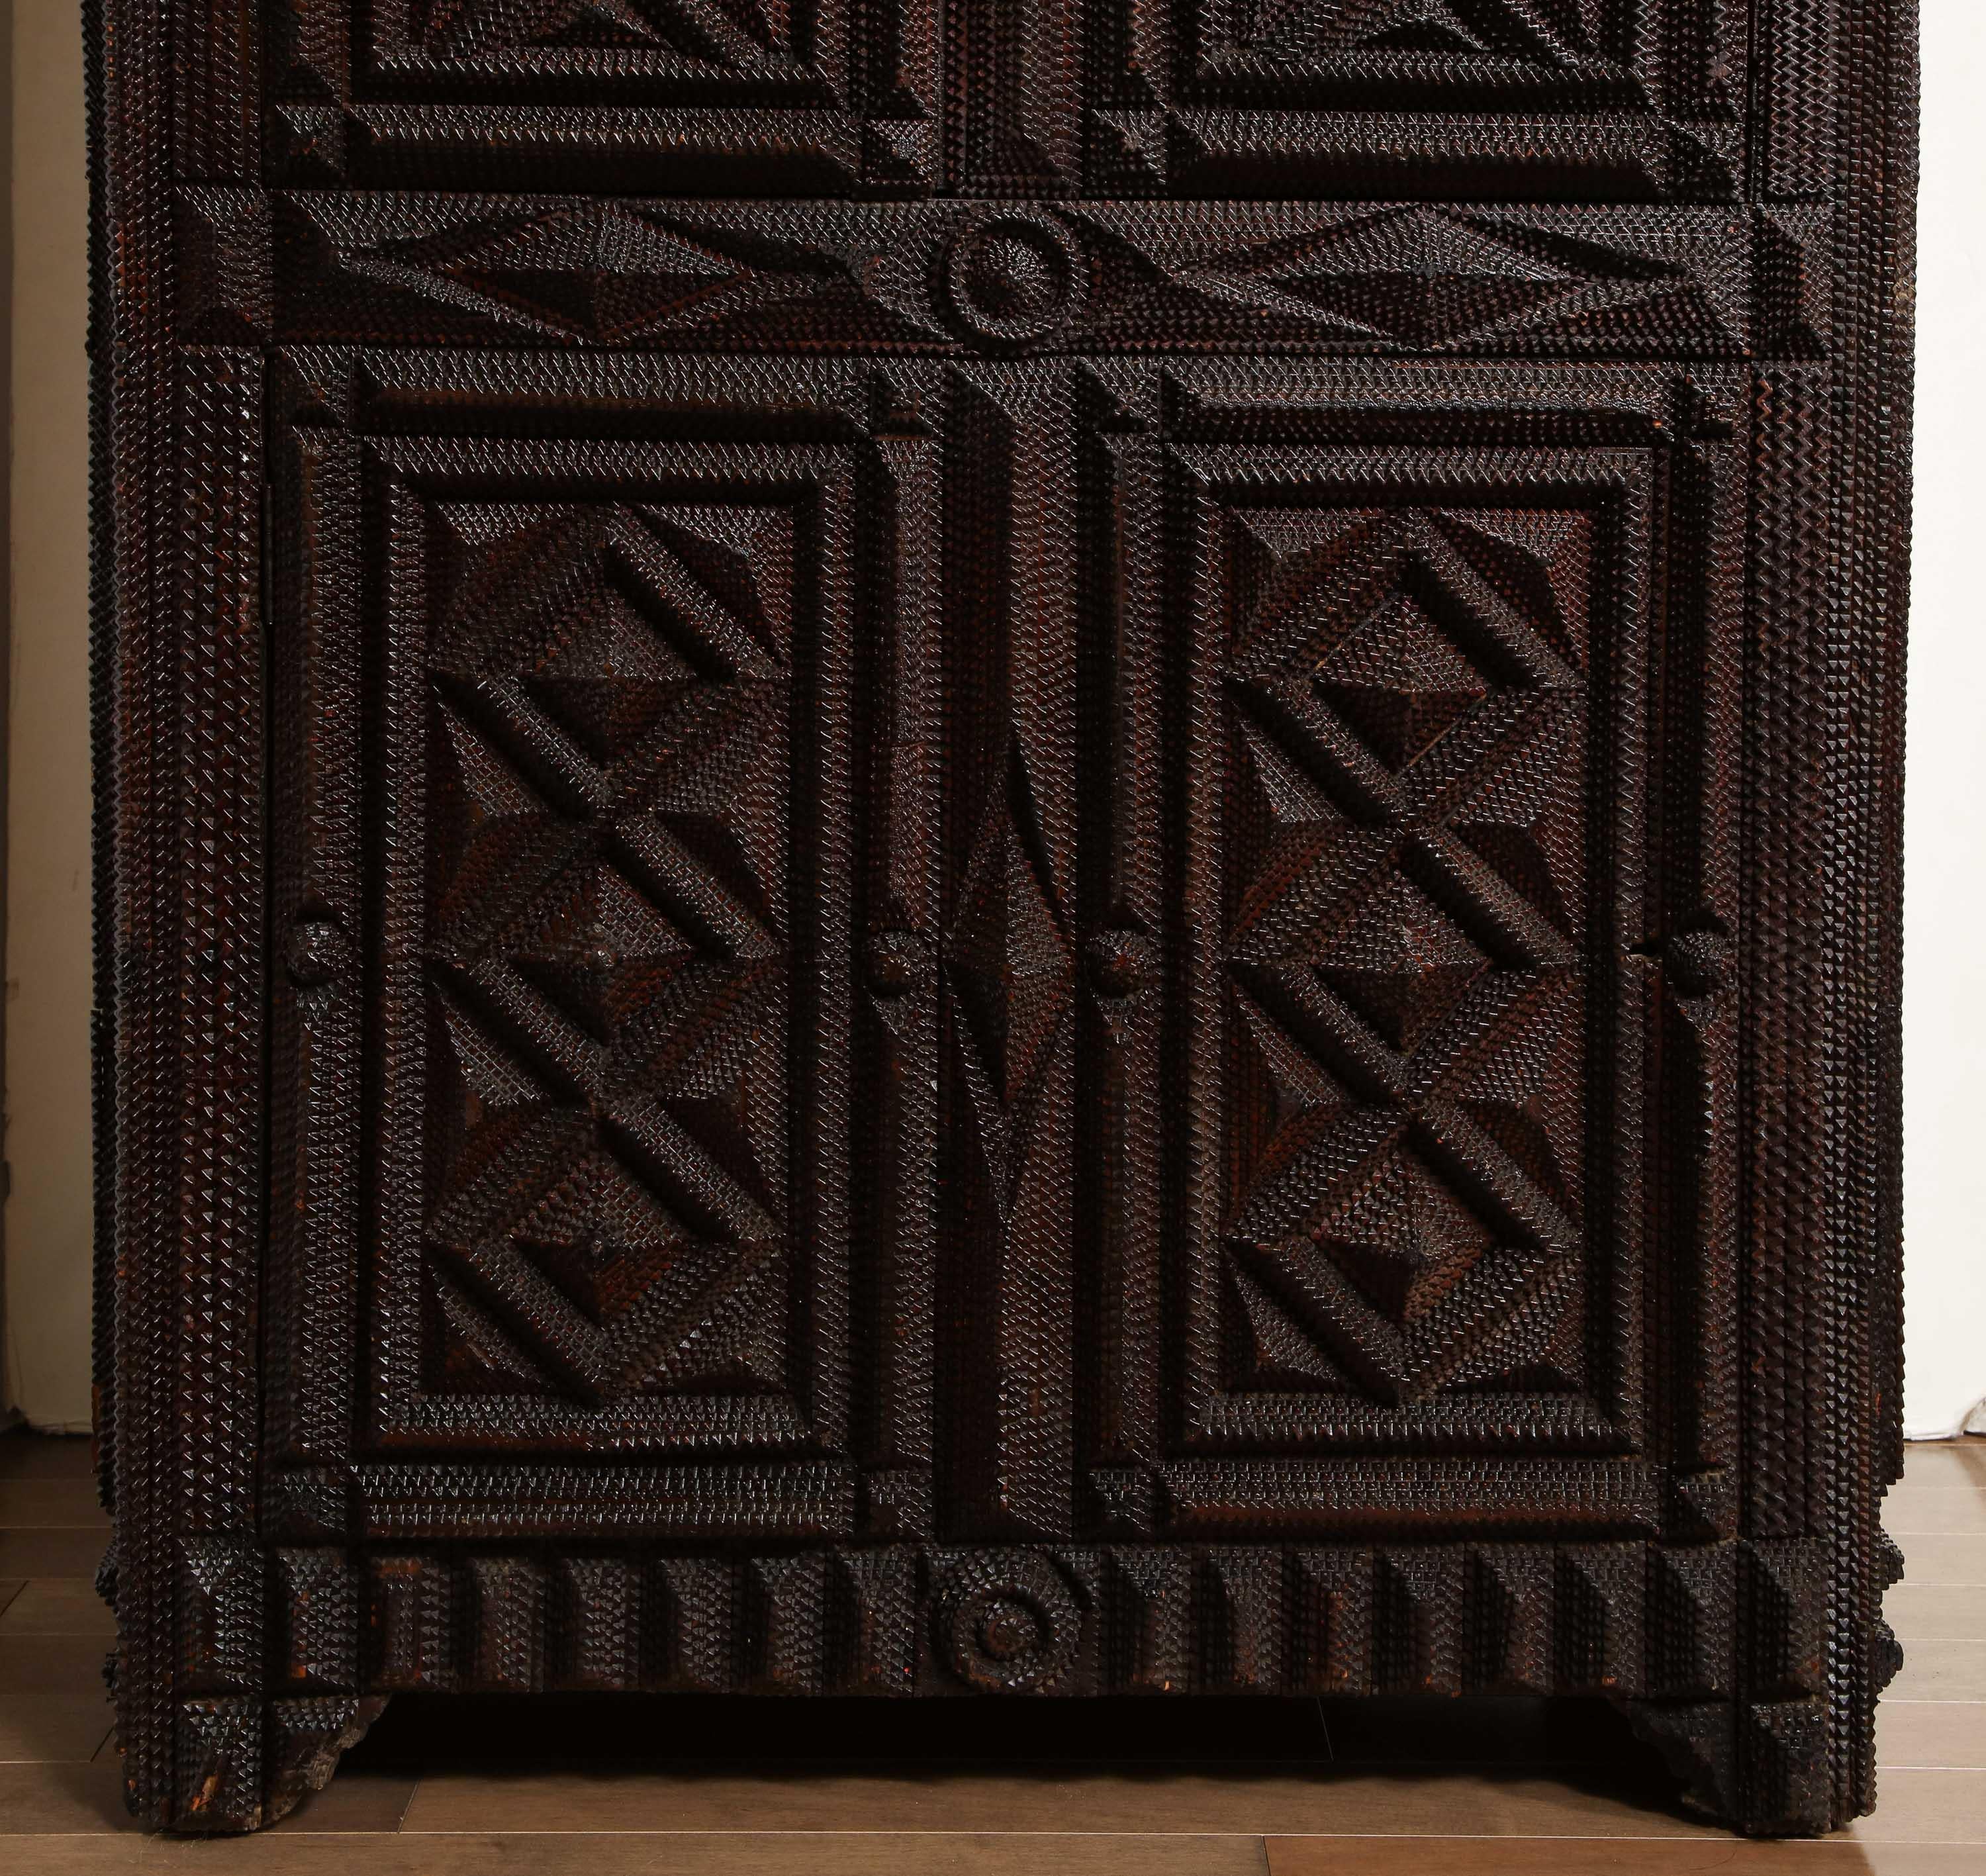 Exceptional American Tramp Art Cupboard, Early 20th Century 5